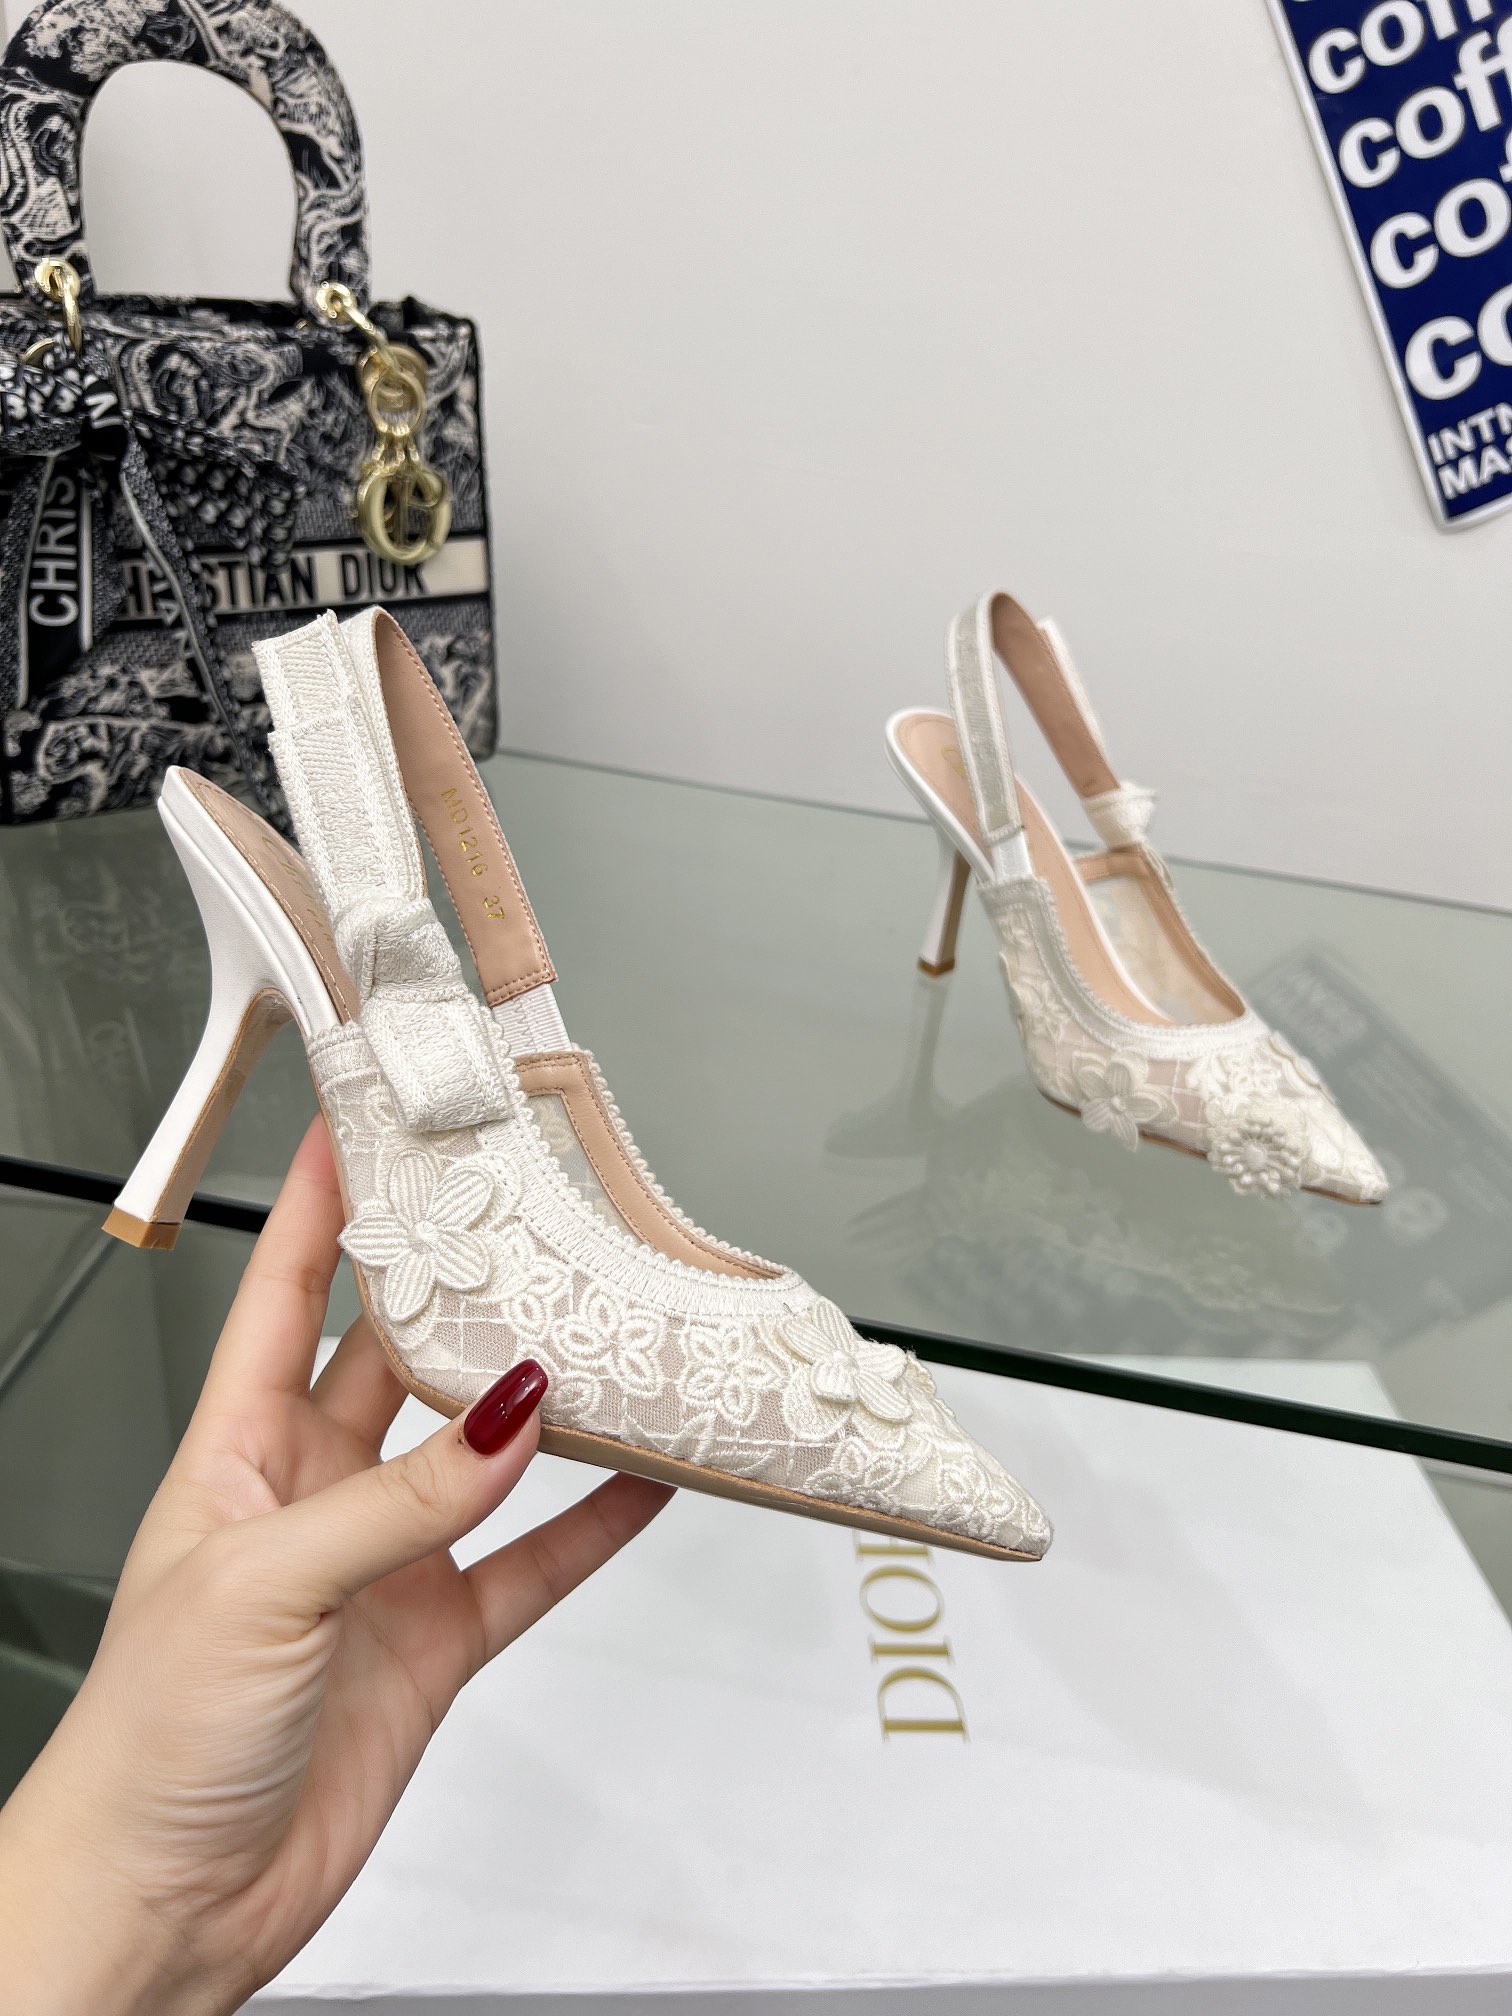 Dior Shoes High Heel Pumps Best Replica Quality
 Embroidery Genuine Leather Sheepskin Spring/Summer Collection